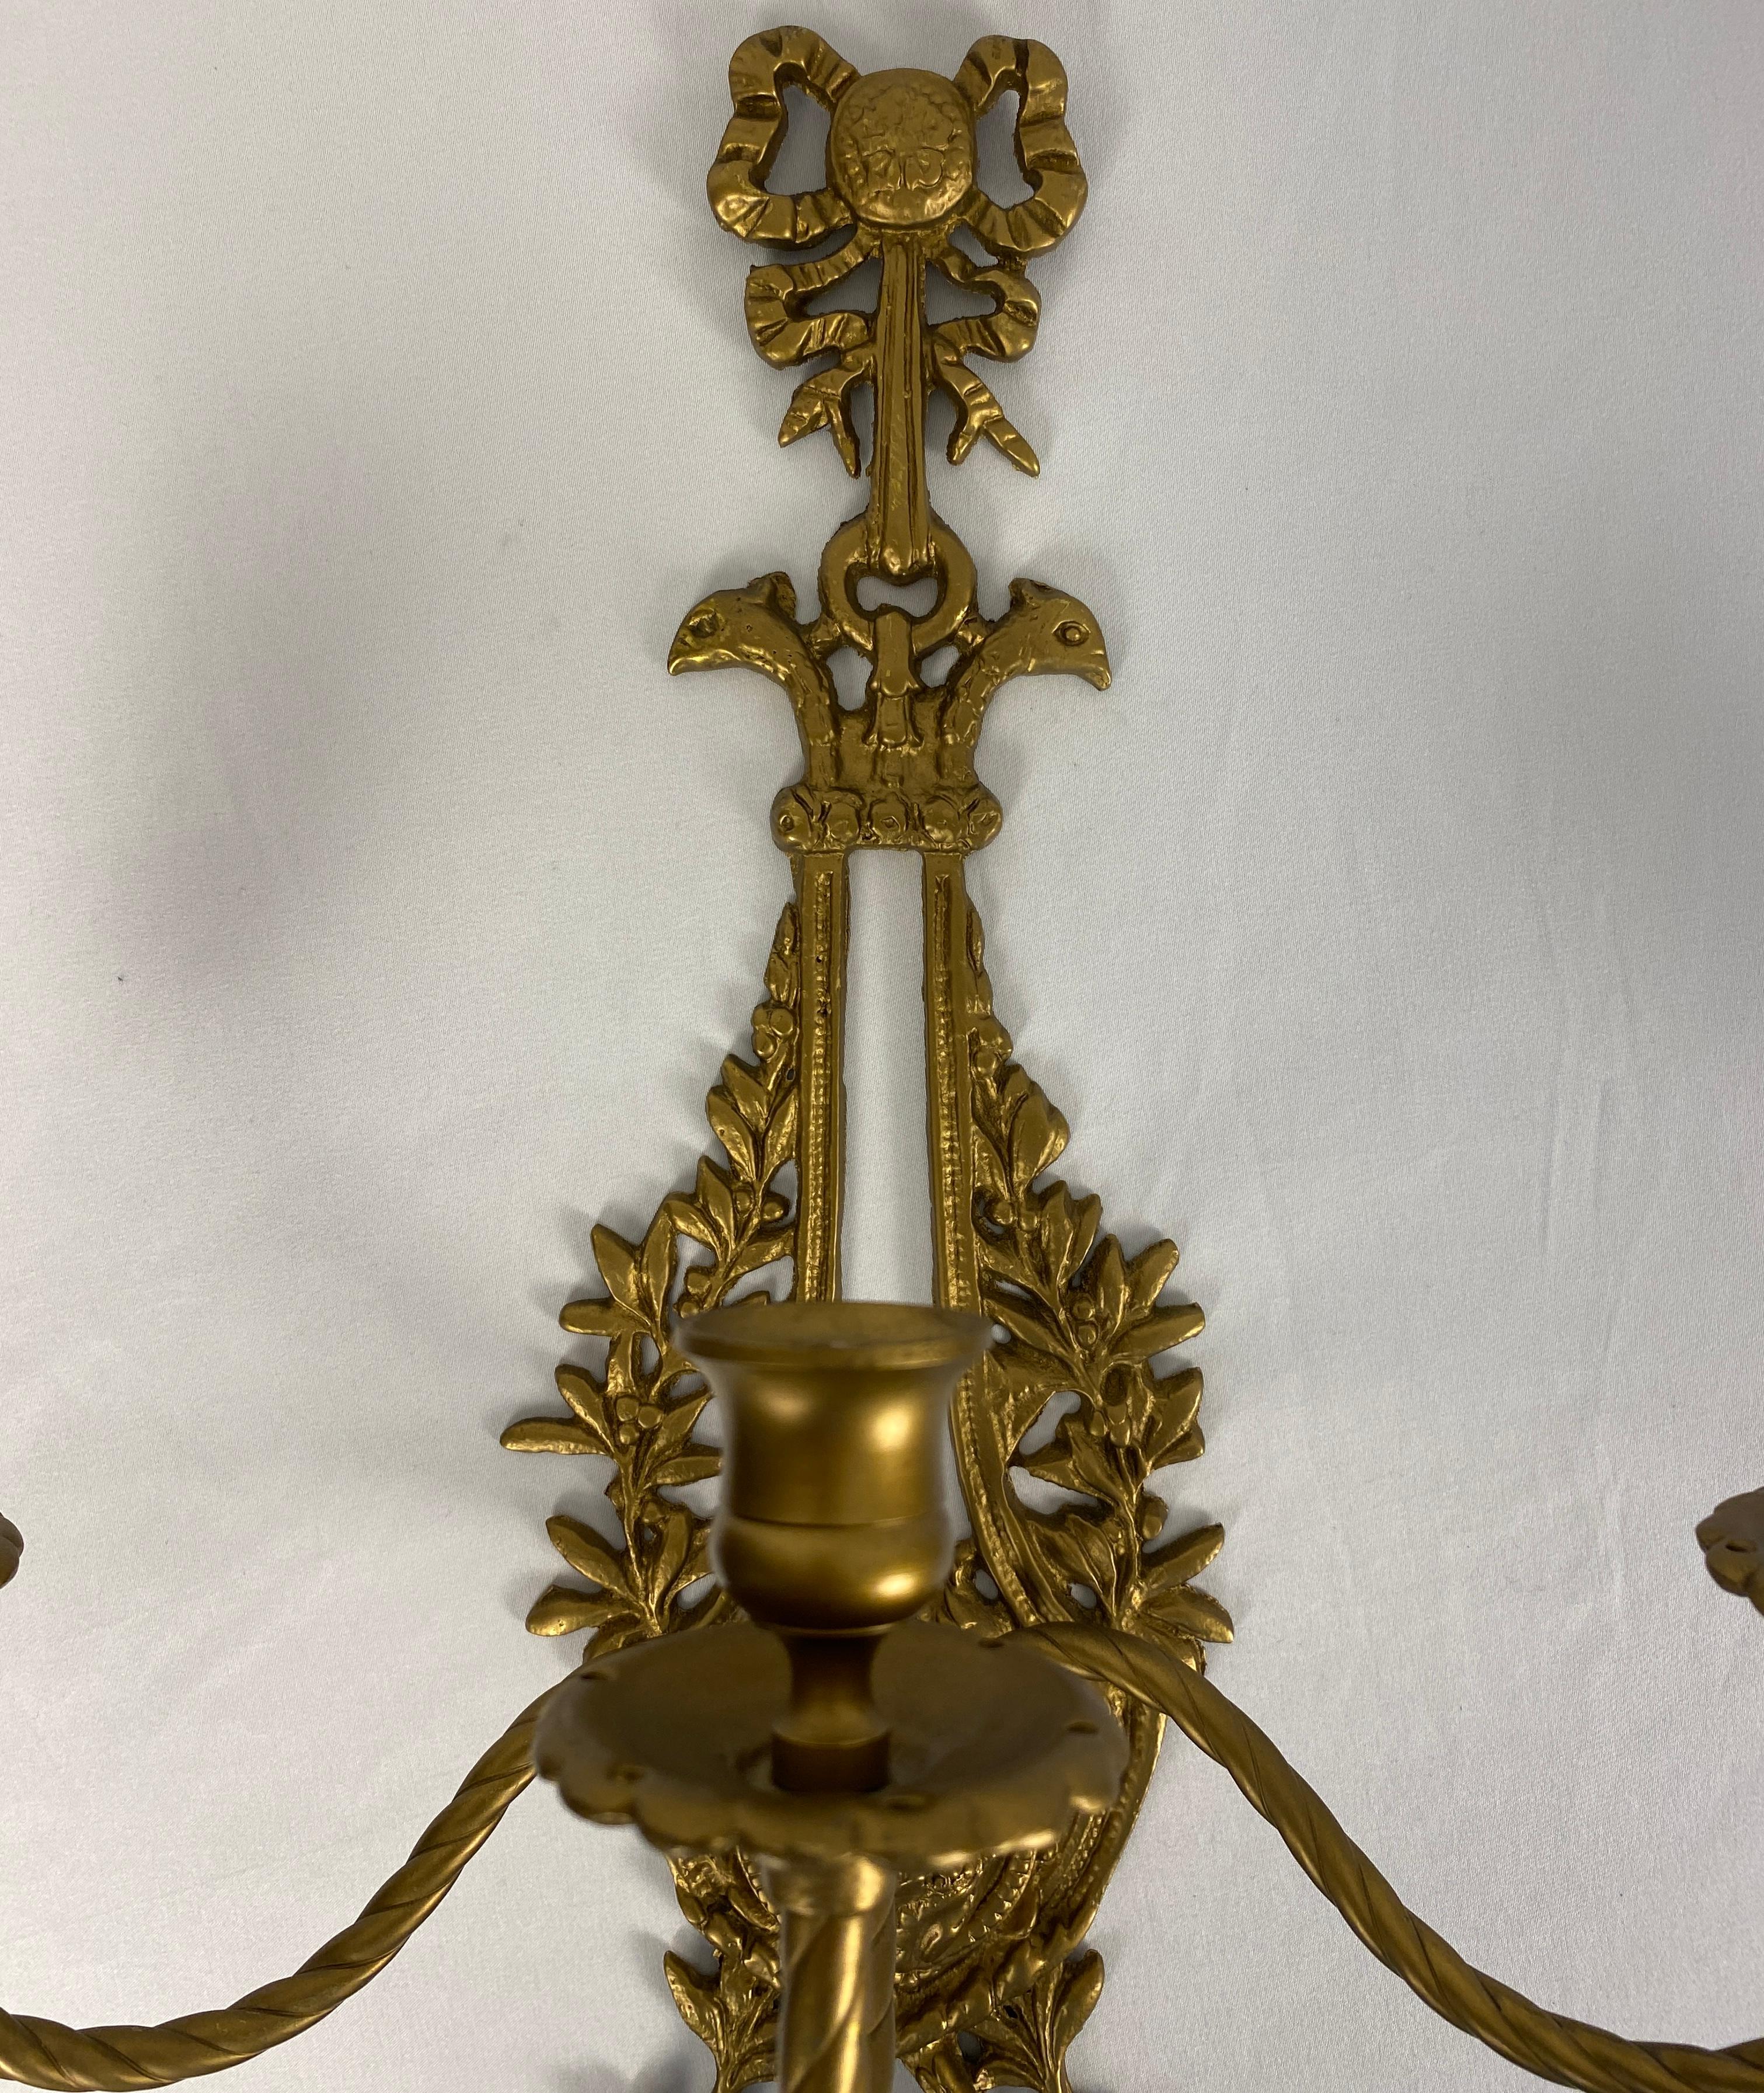 Pair of French Louis XV Rococo style gilded bronze double arm wall sconces, in very good antique condition. Beautiful decorative floral and leaf tiered scrolling arms. 

Very good quality and well cast.

These pair of French Louis XV bronze double